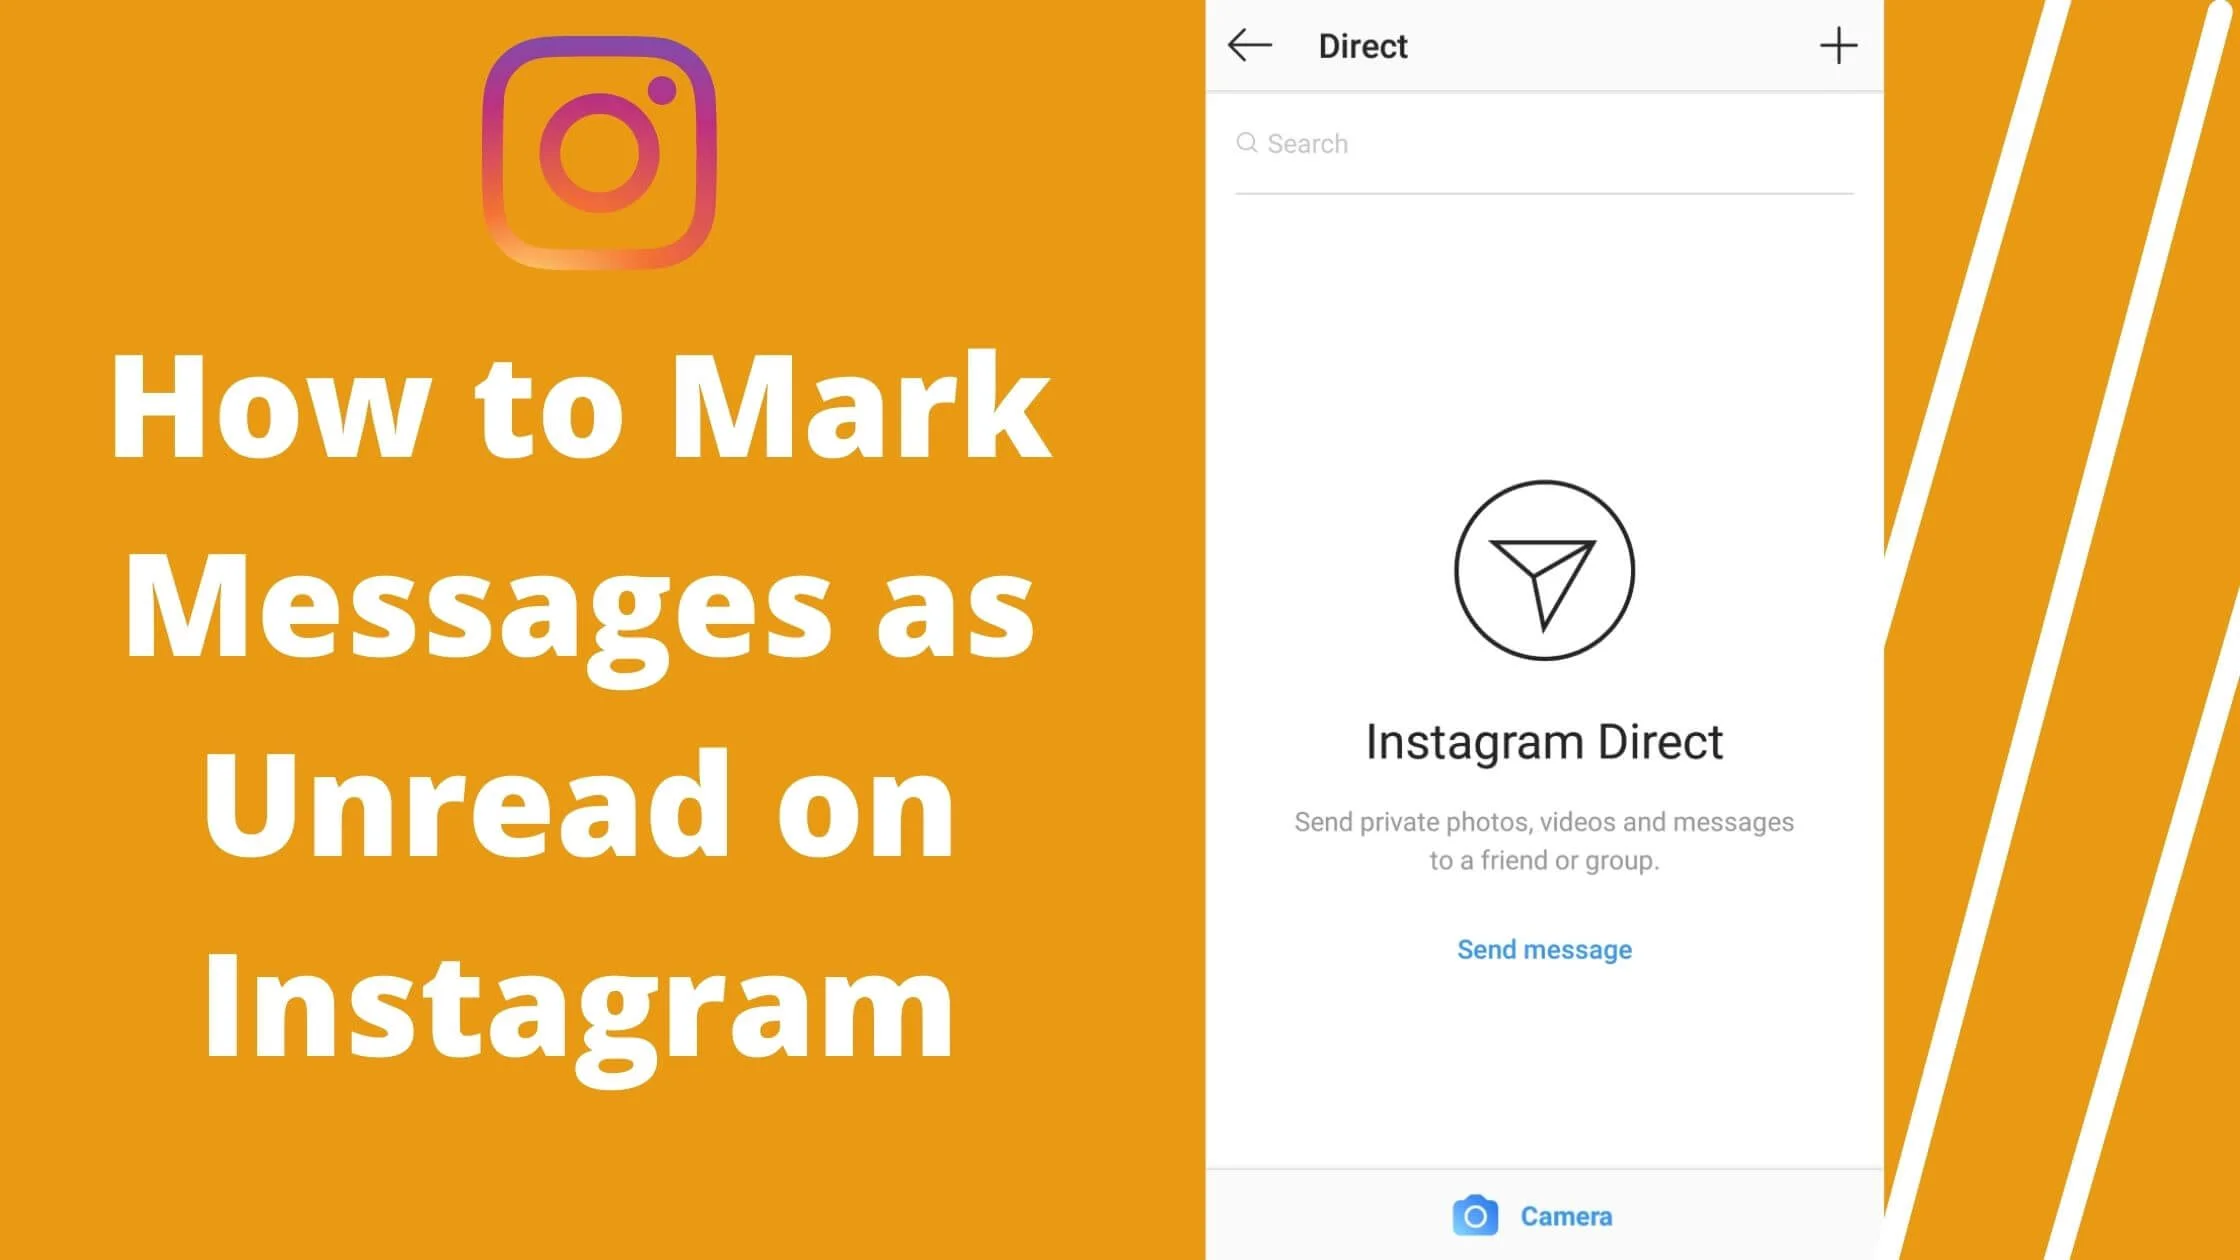 How to Mark Messages as Unread on Instagram